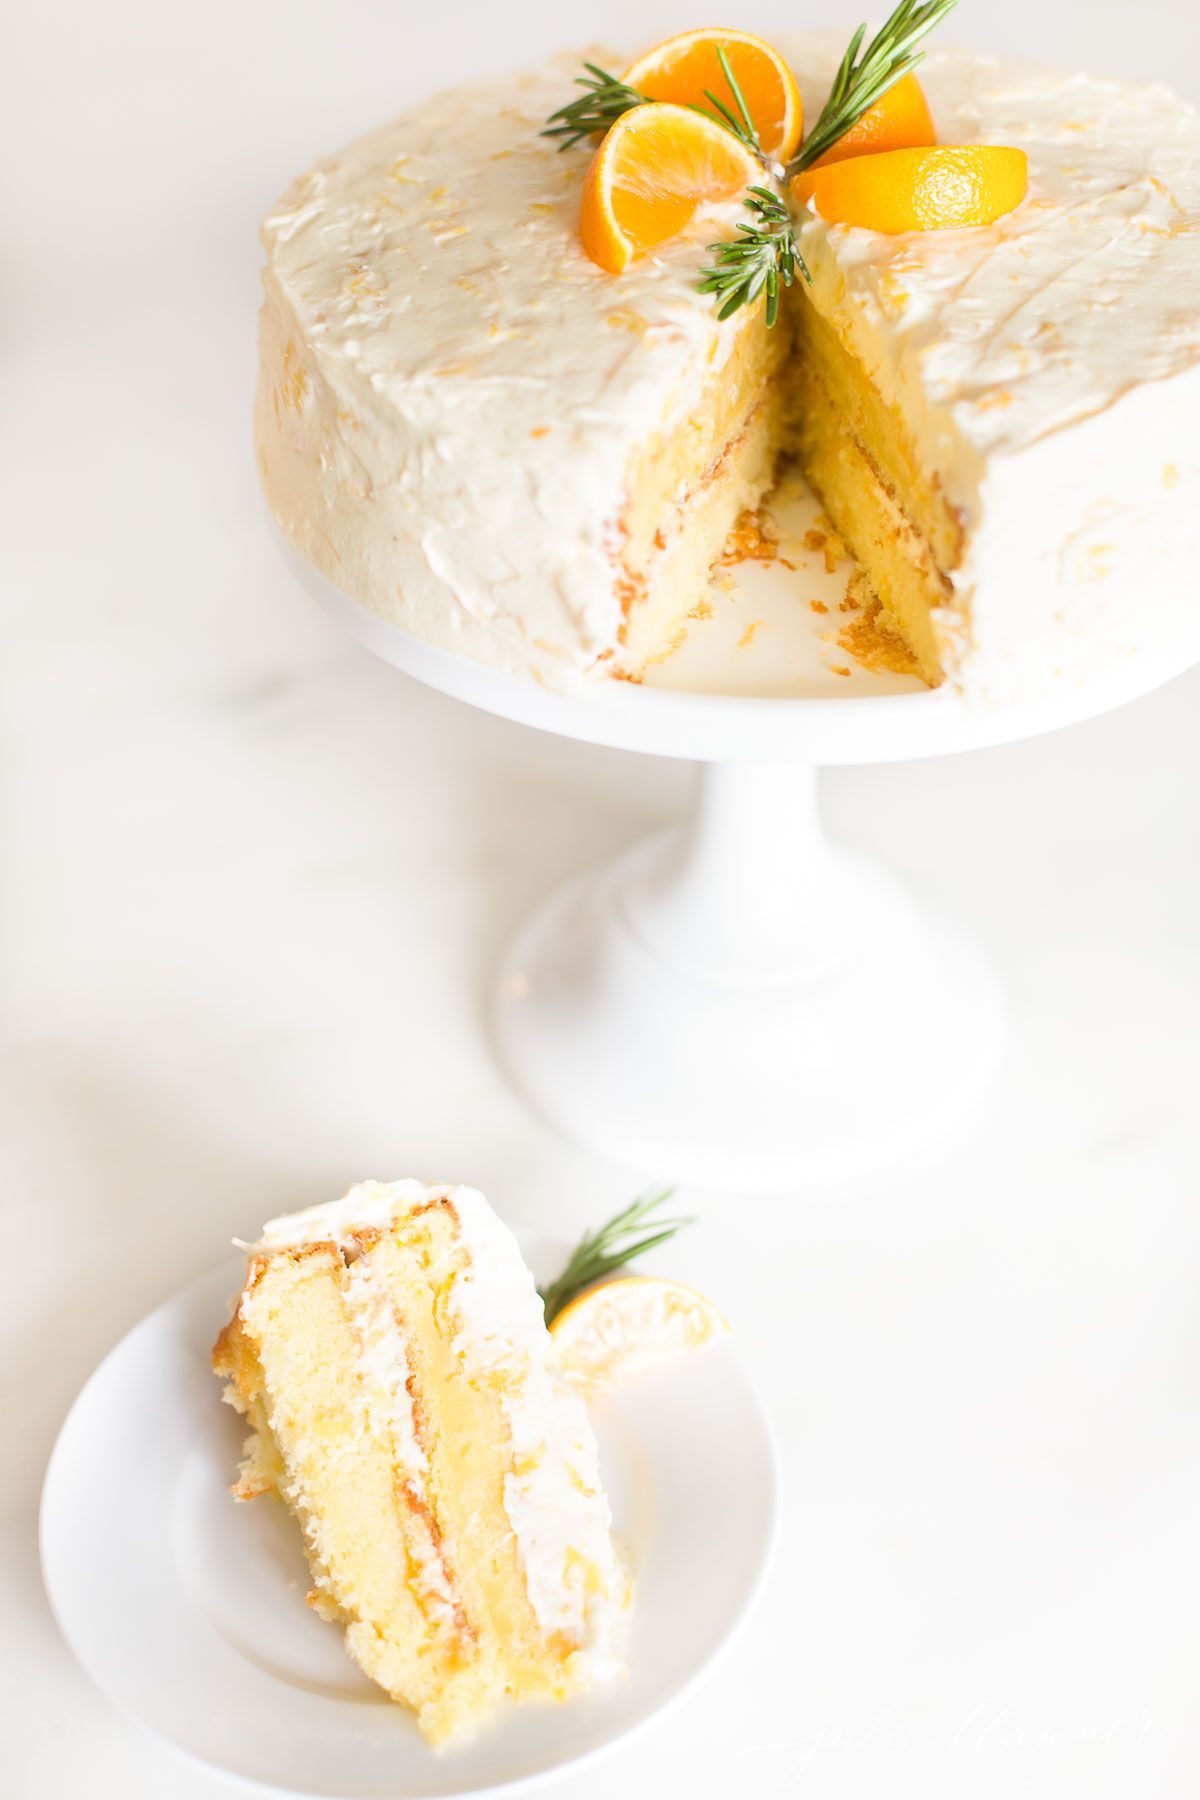 A mandarin orange cake on a cake stand, slice removed to a plate in front.